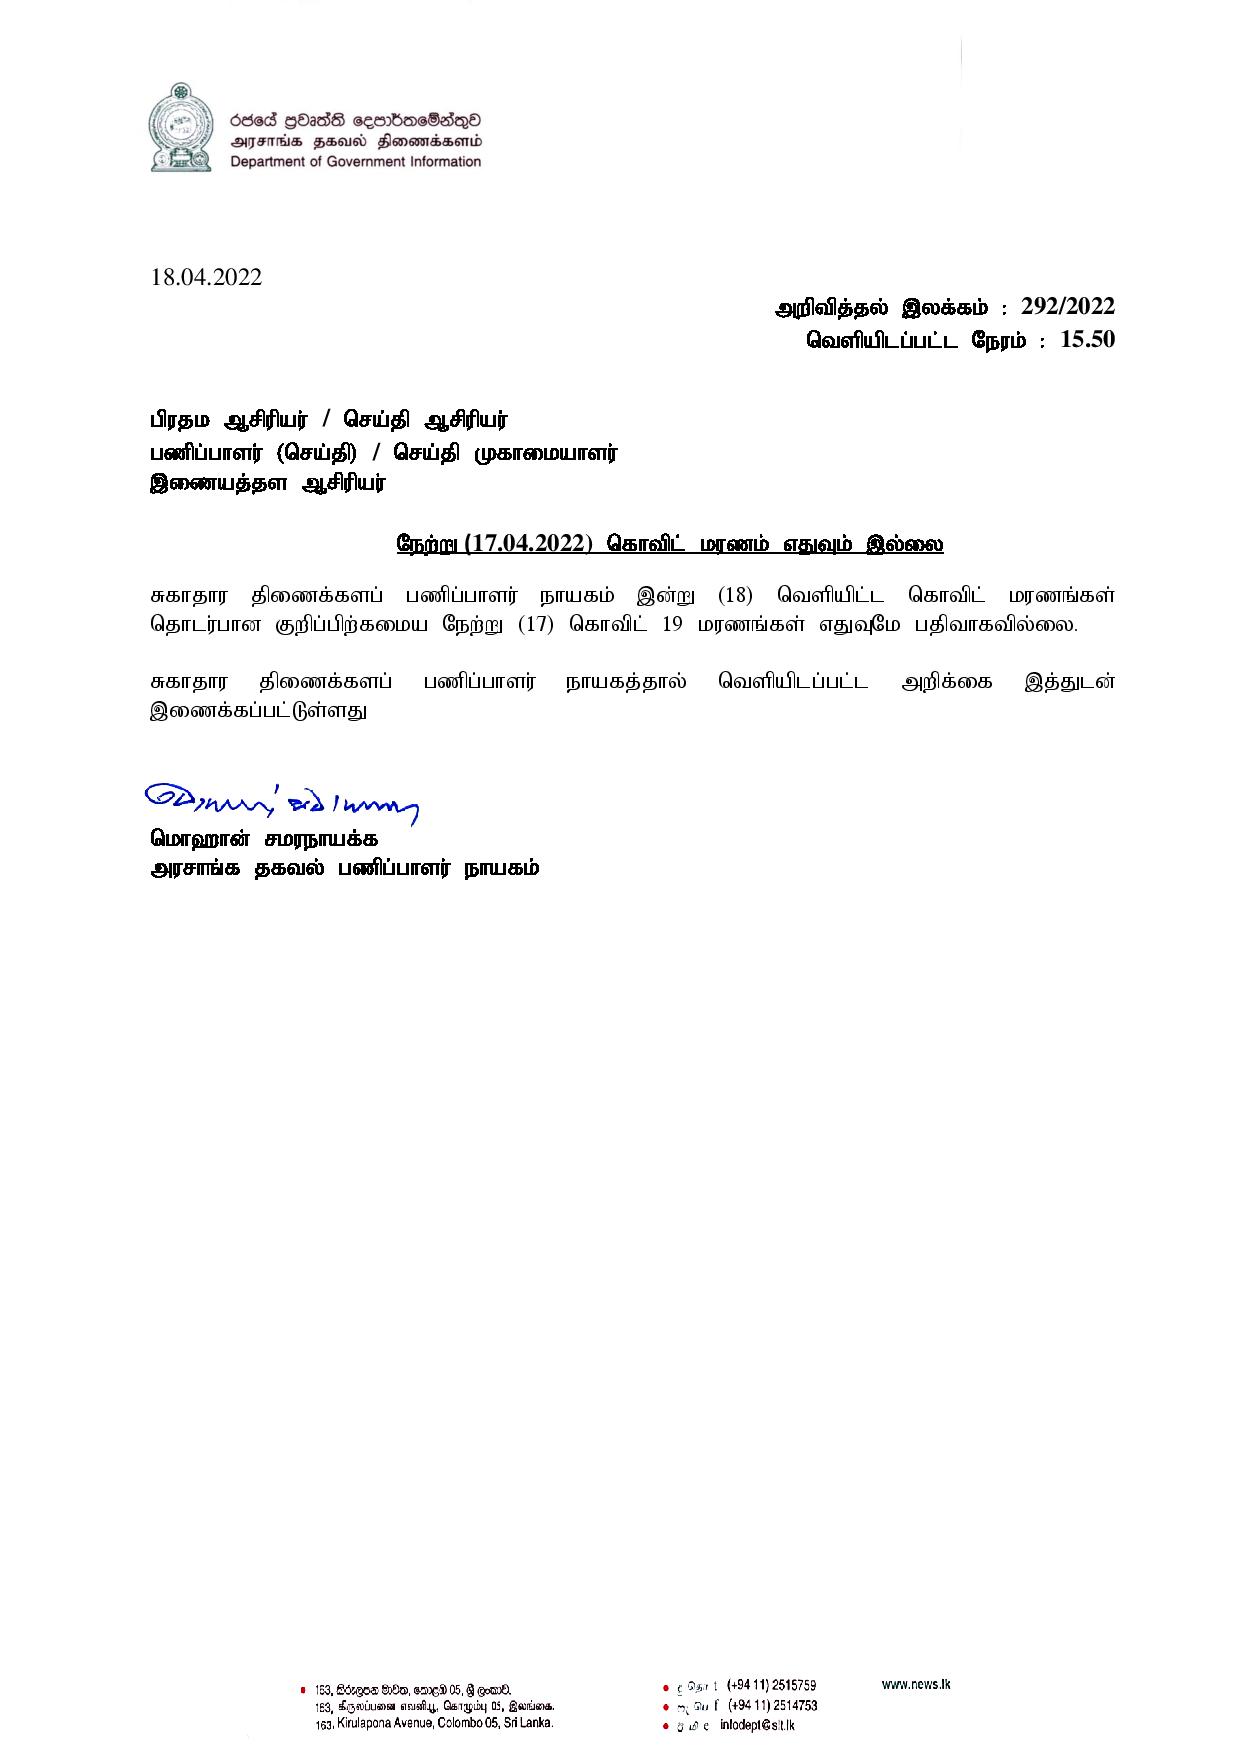 Press Release 292 Tamil page 001